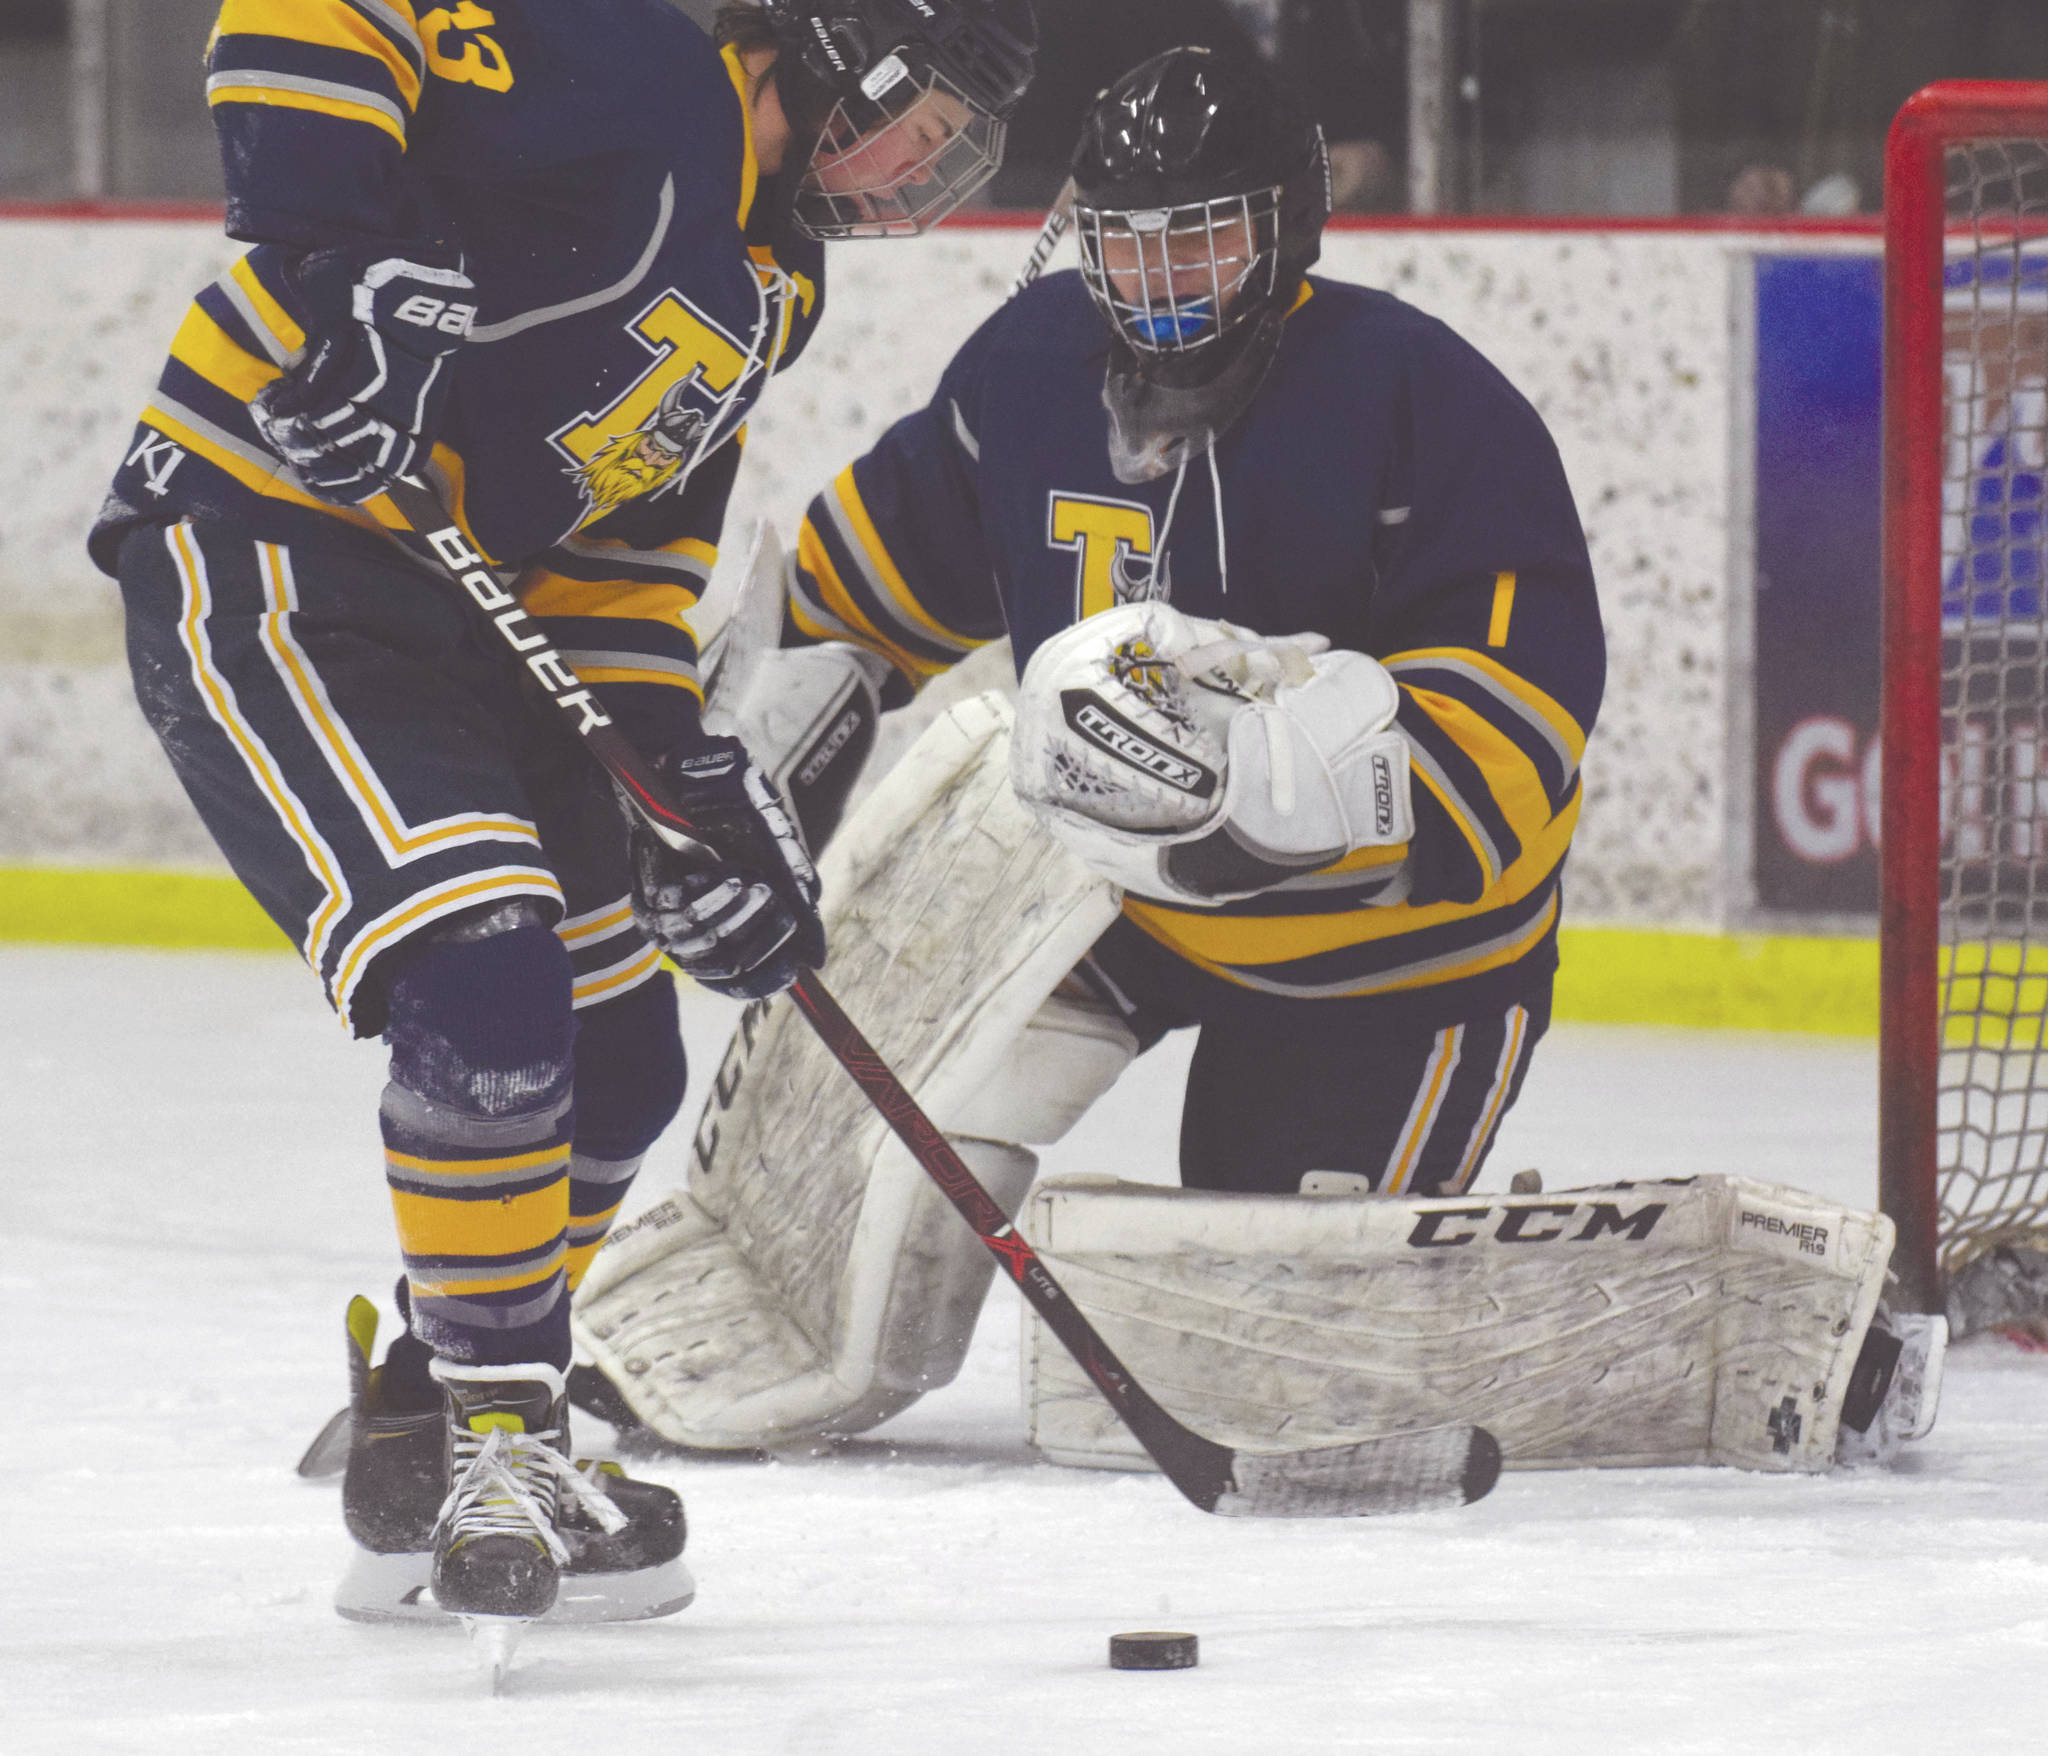 Tri-Valley’s Oliver Cole clears the puck out from in front of goalie Danny Renshaw on Friday at the Kenai Multi-Purpose Facility in Kenai. (Photo by Jeff Helminiak/Peninsula Clarion)